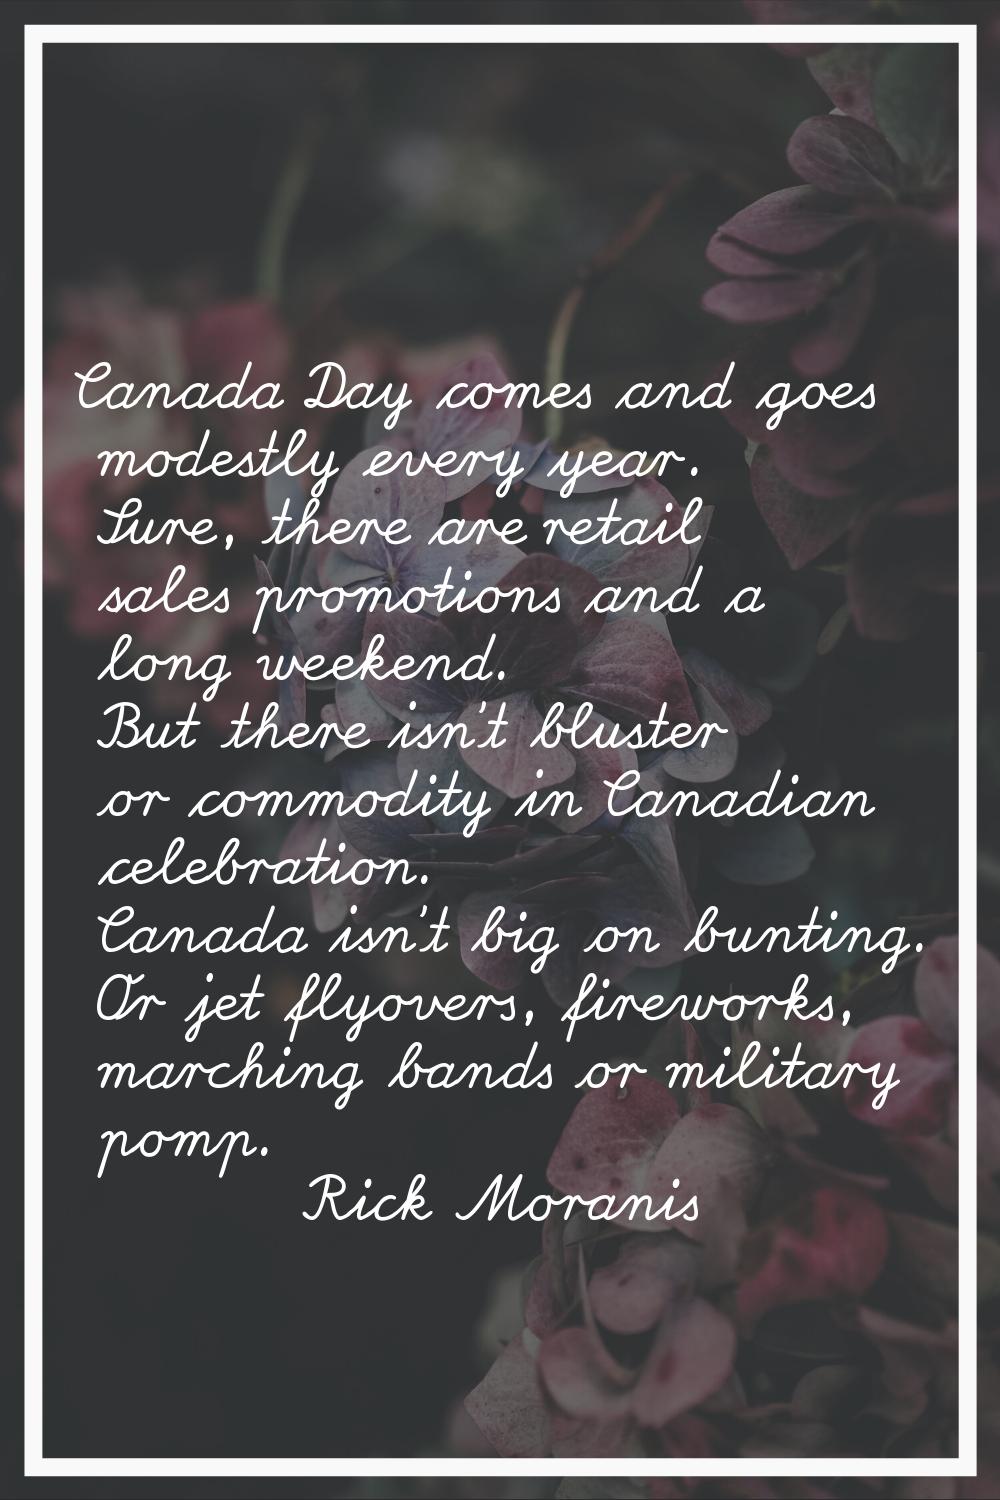 Canada Day comes and goes modestly every year. Sure, there are retail sales promotions and a long w